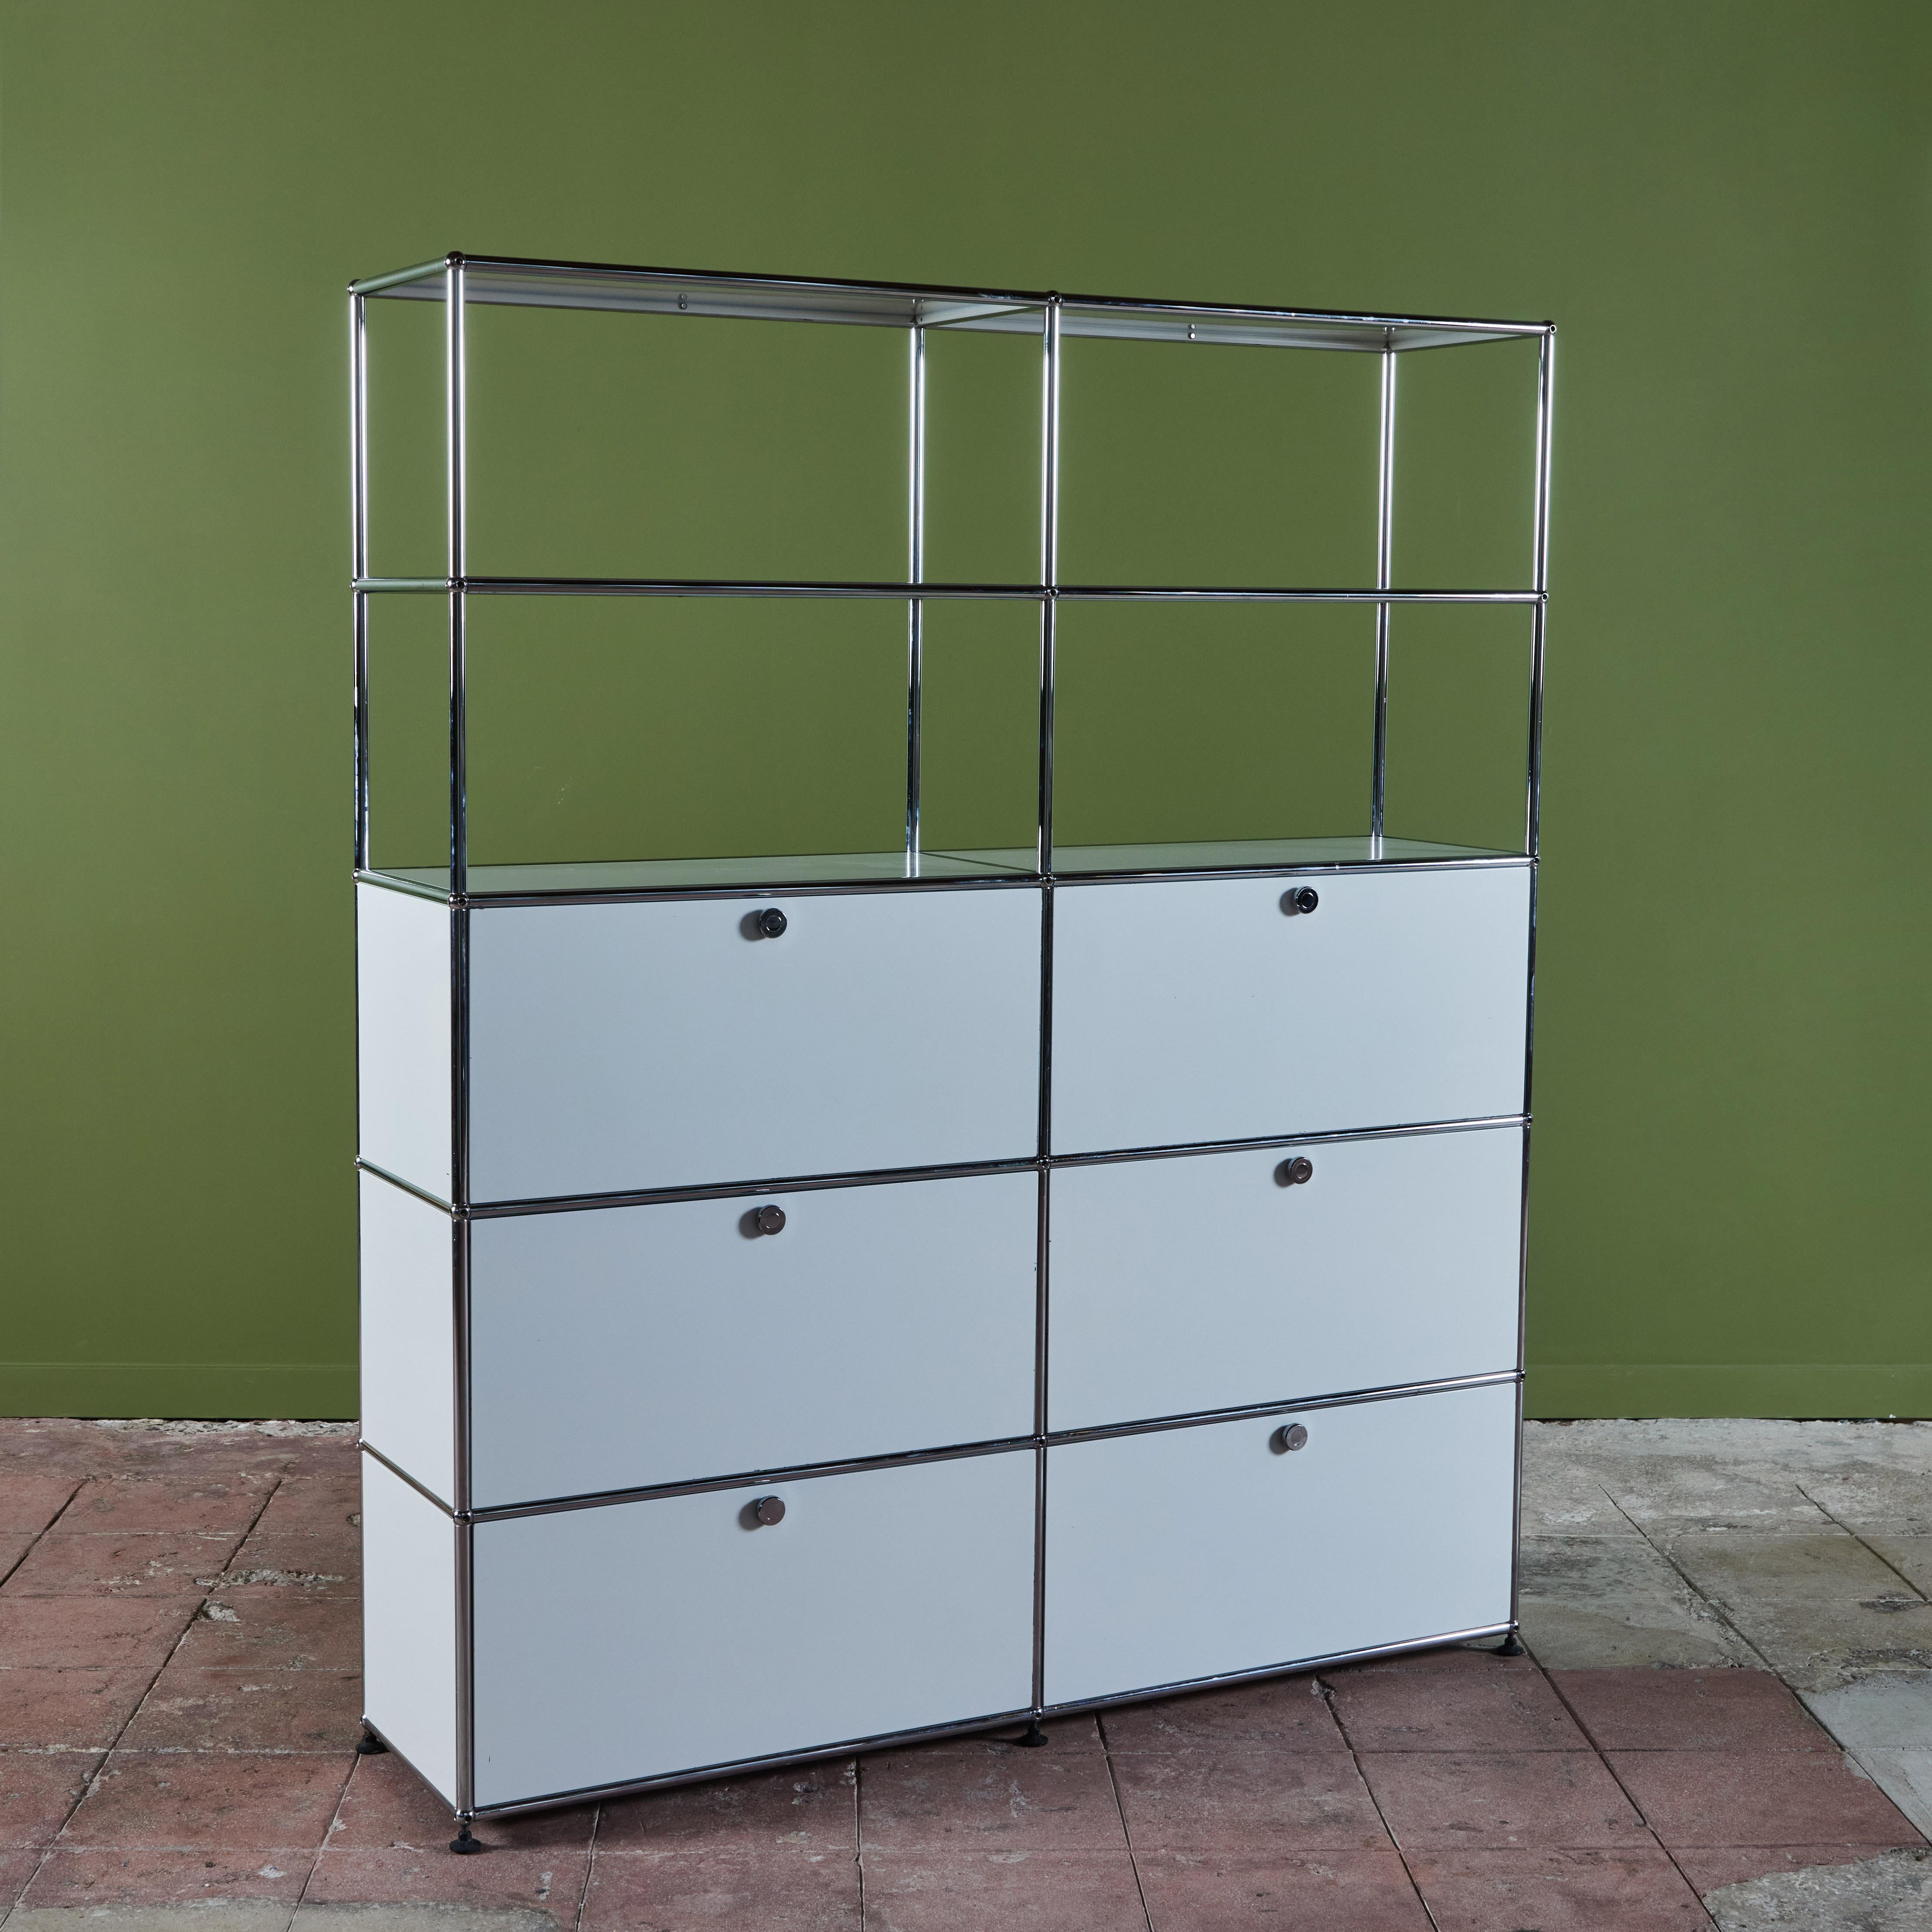 Architect Fritz Haller was commissioned by USM Modular Furniture in the 1960s to create a USM Haller shelving unit. This storage system, made in Switzerland, was created based on three basic construction elements; a ball, screw in connecting tubes